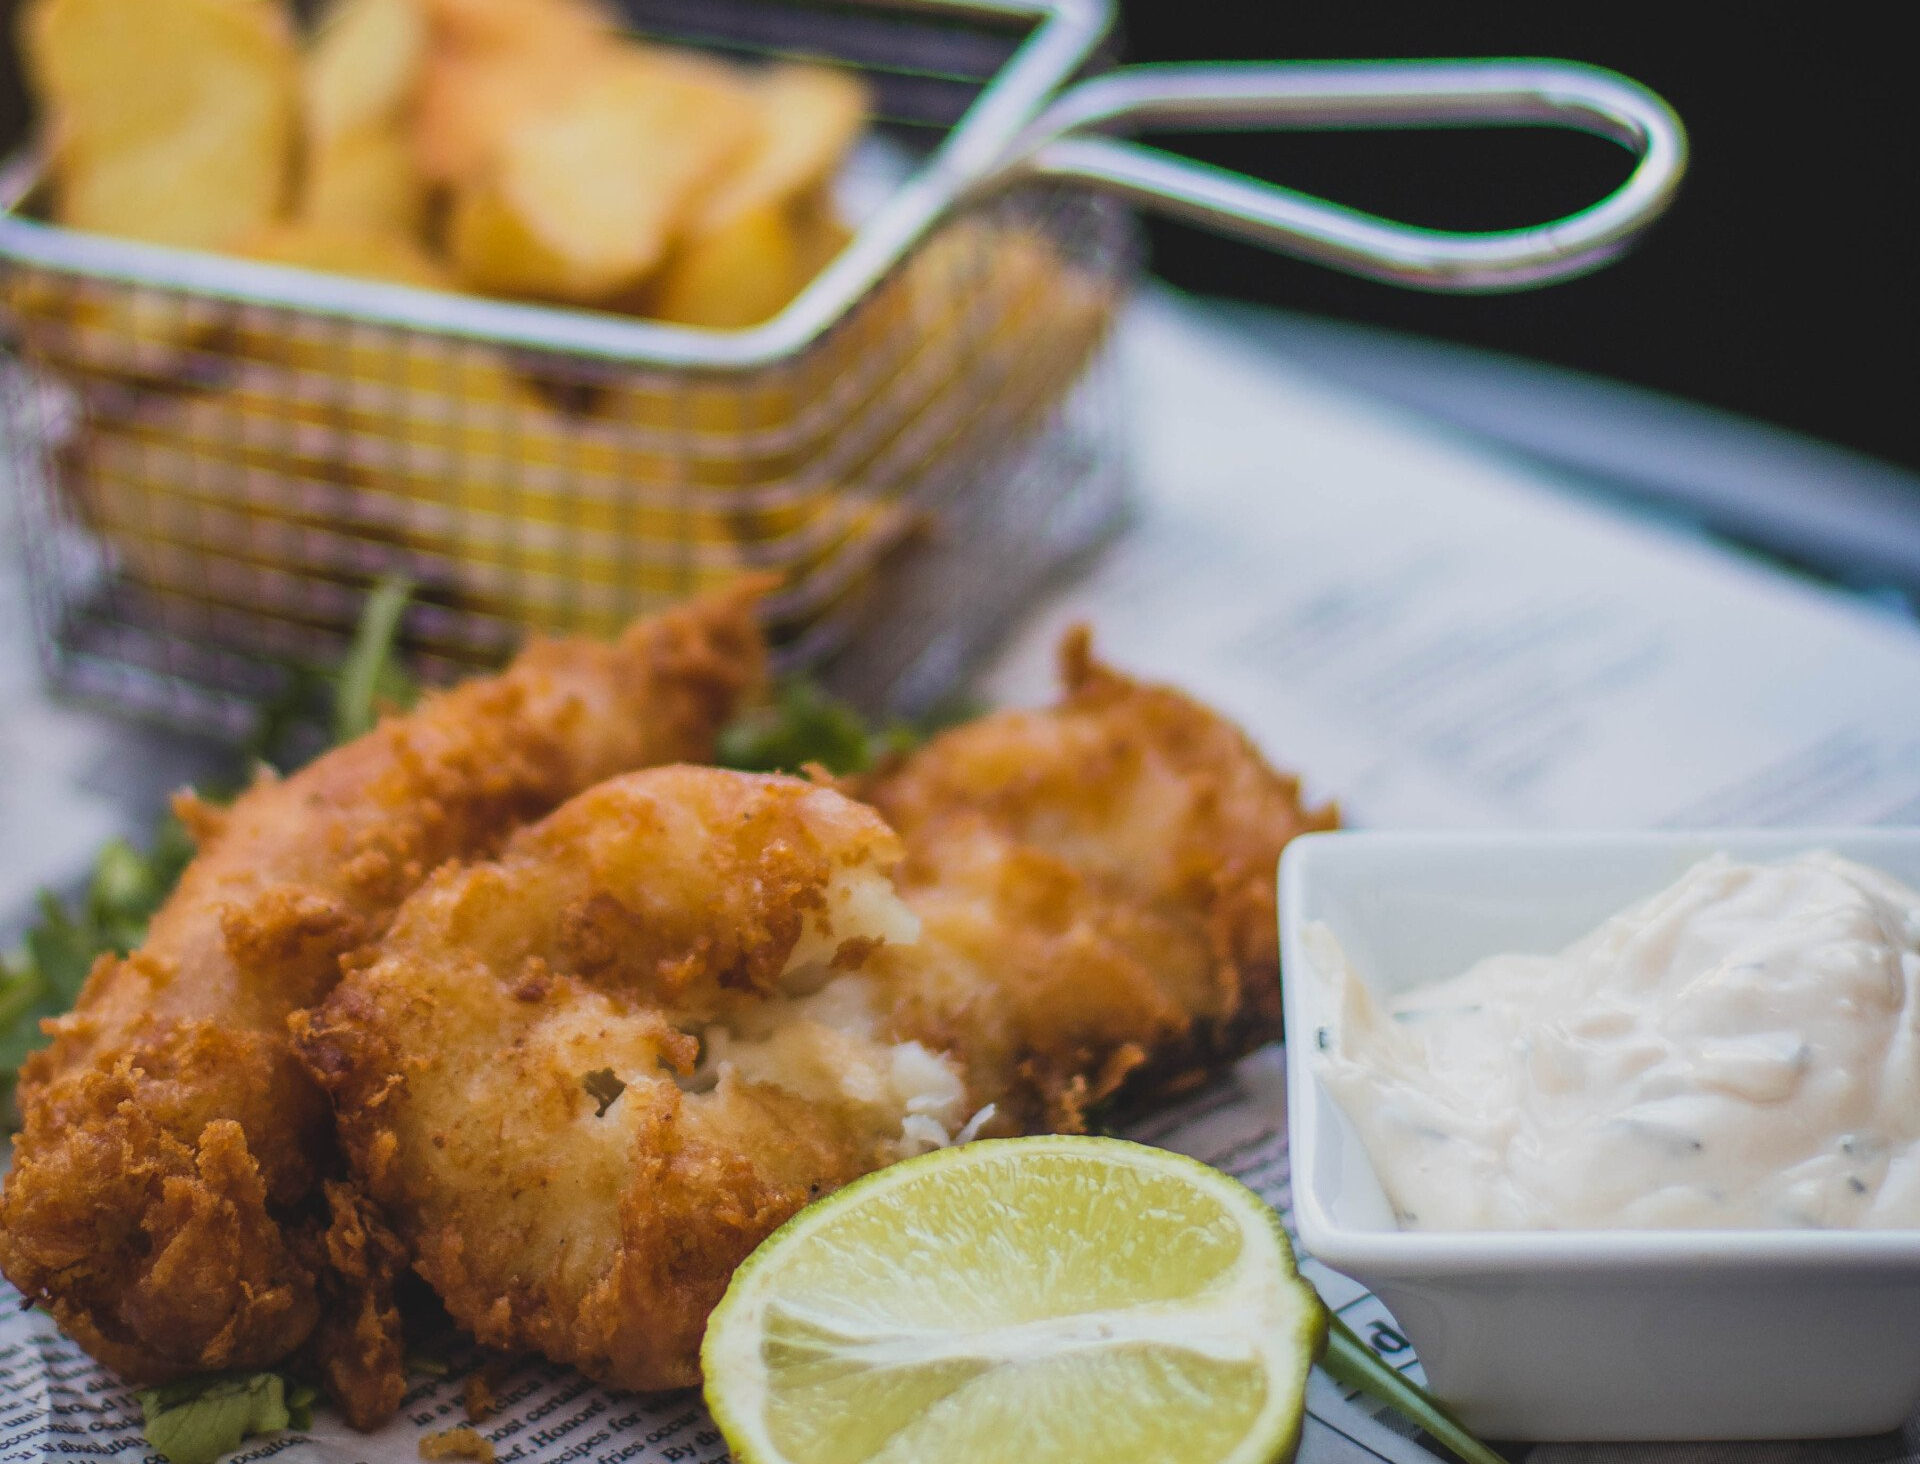 A plate of fish and chips with a slice of lime and a bowl of dipping sauce.